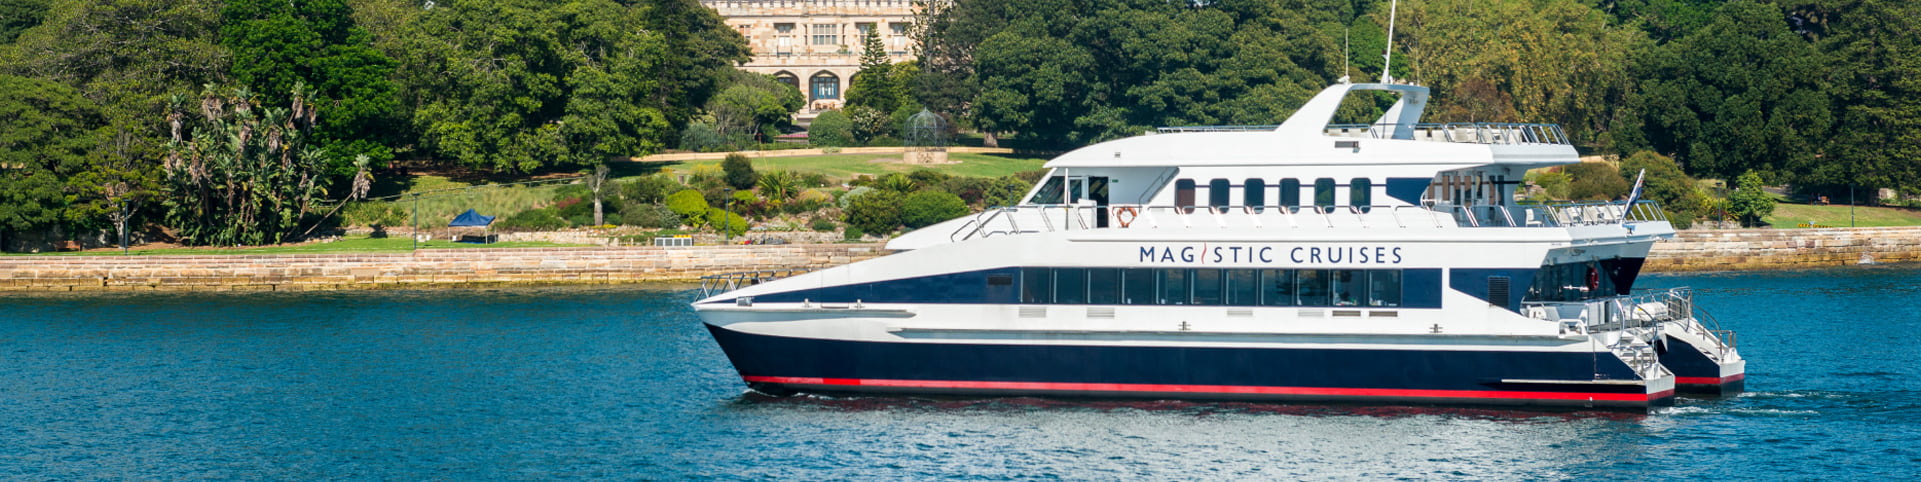 Magistic Cruises offer a splendid sightseeing experience, treating you to the most popular landmarks in the region